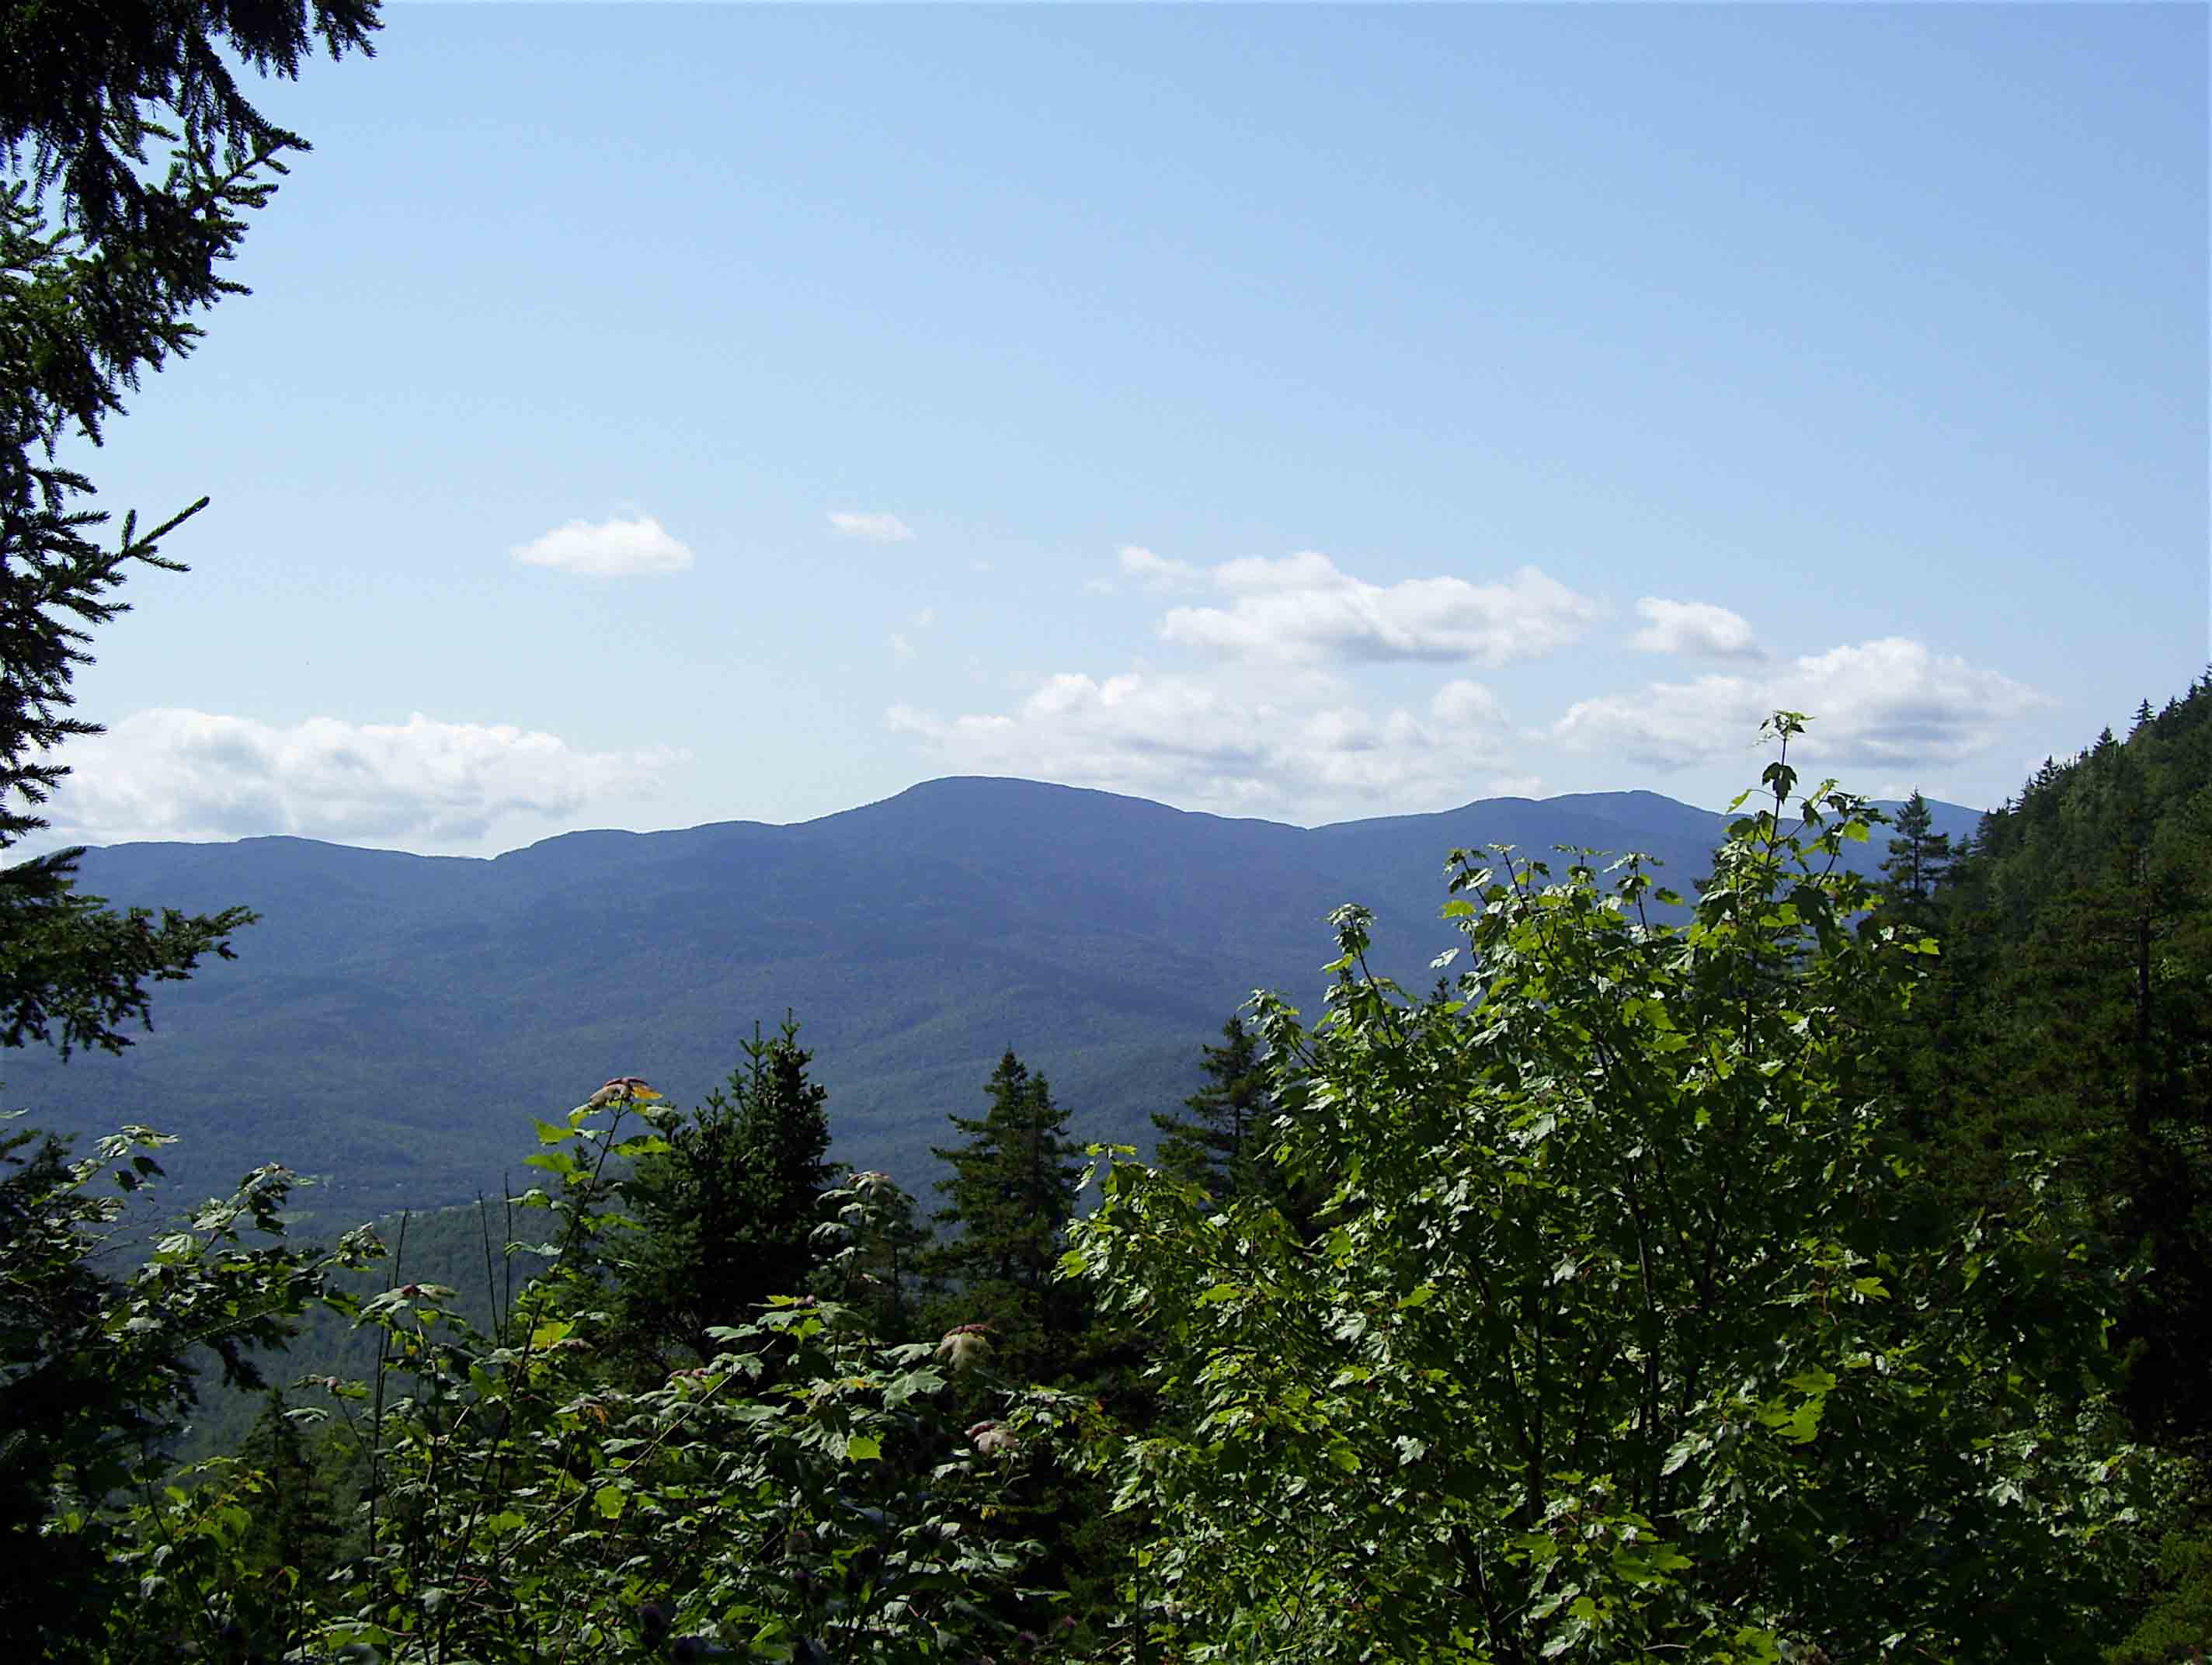 View from the Gentian Pond shelter south towards the Carter-Moriah Range.  Courtesy dlcul@conncoll.edu